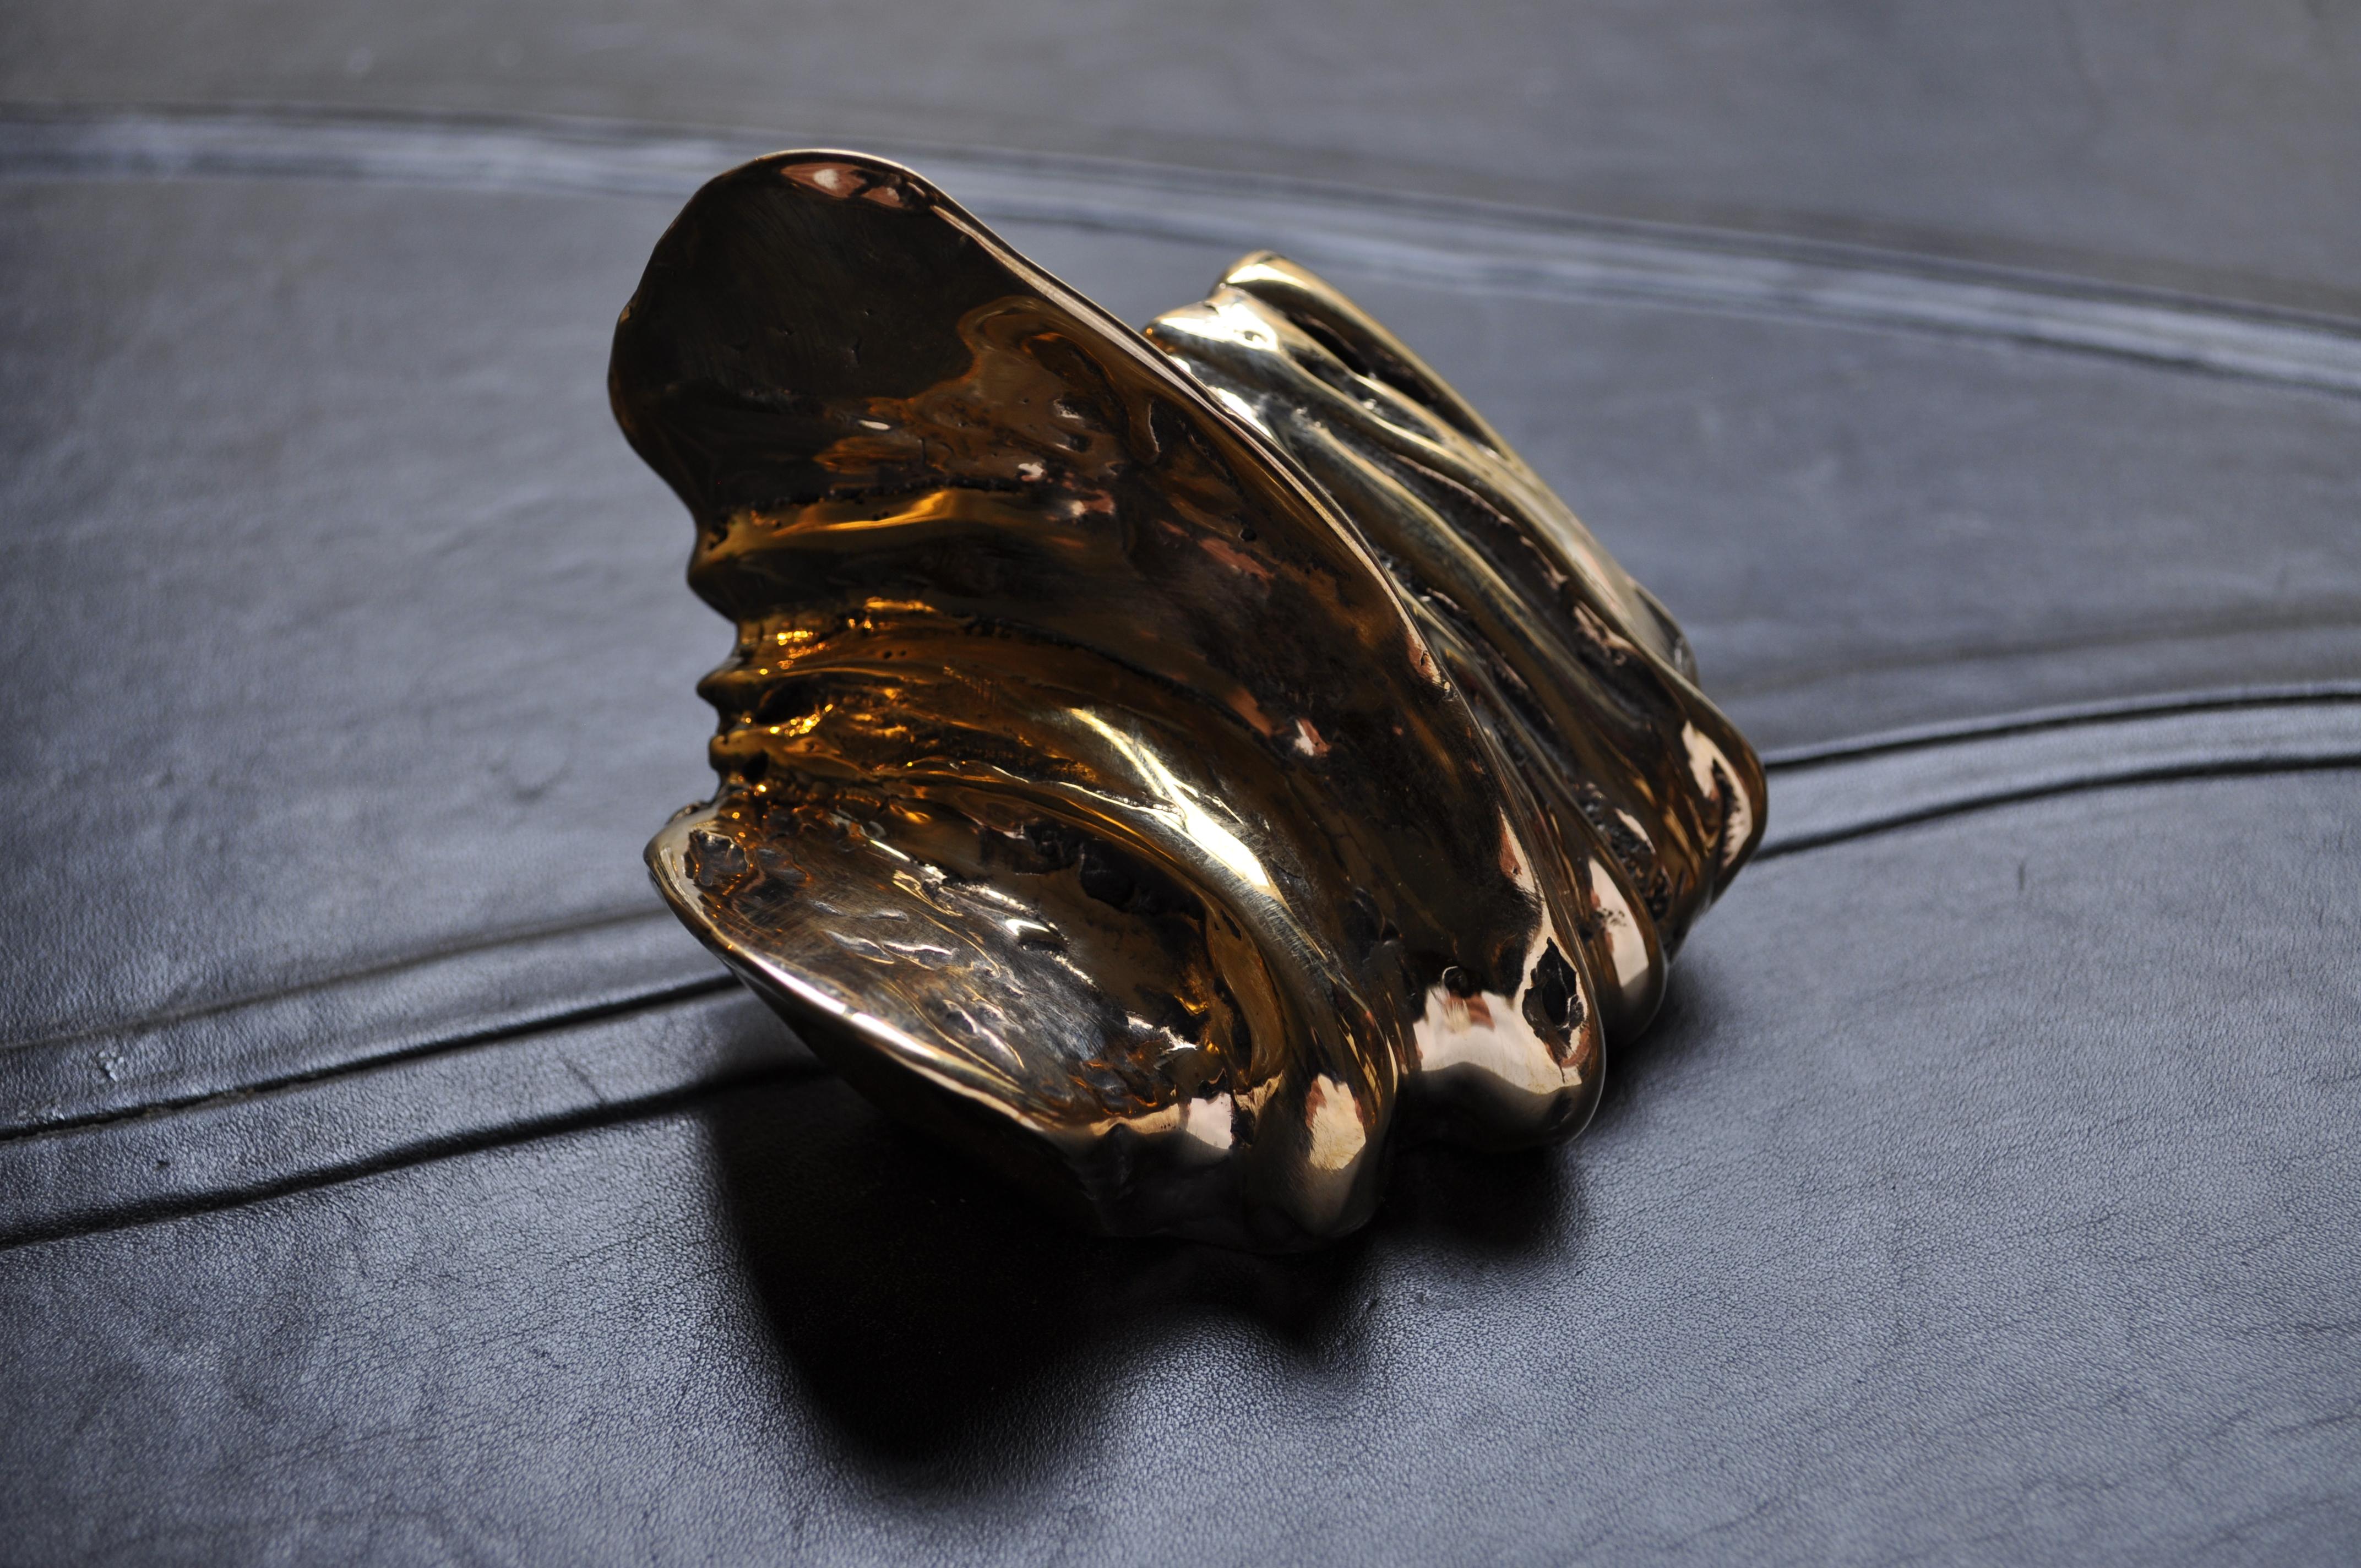 Small shiny sculpture that evokes vegetal and marine forms, smooth to the touch and made in bronze casting, according to the ancient technique of French sand molds. This handle is a sculptural touch for any closet or furniture.